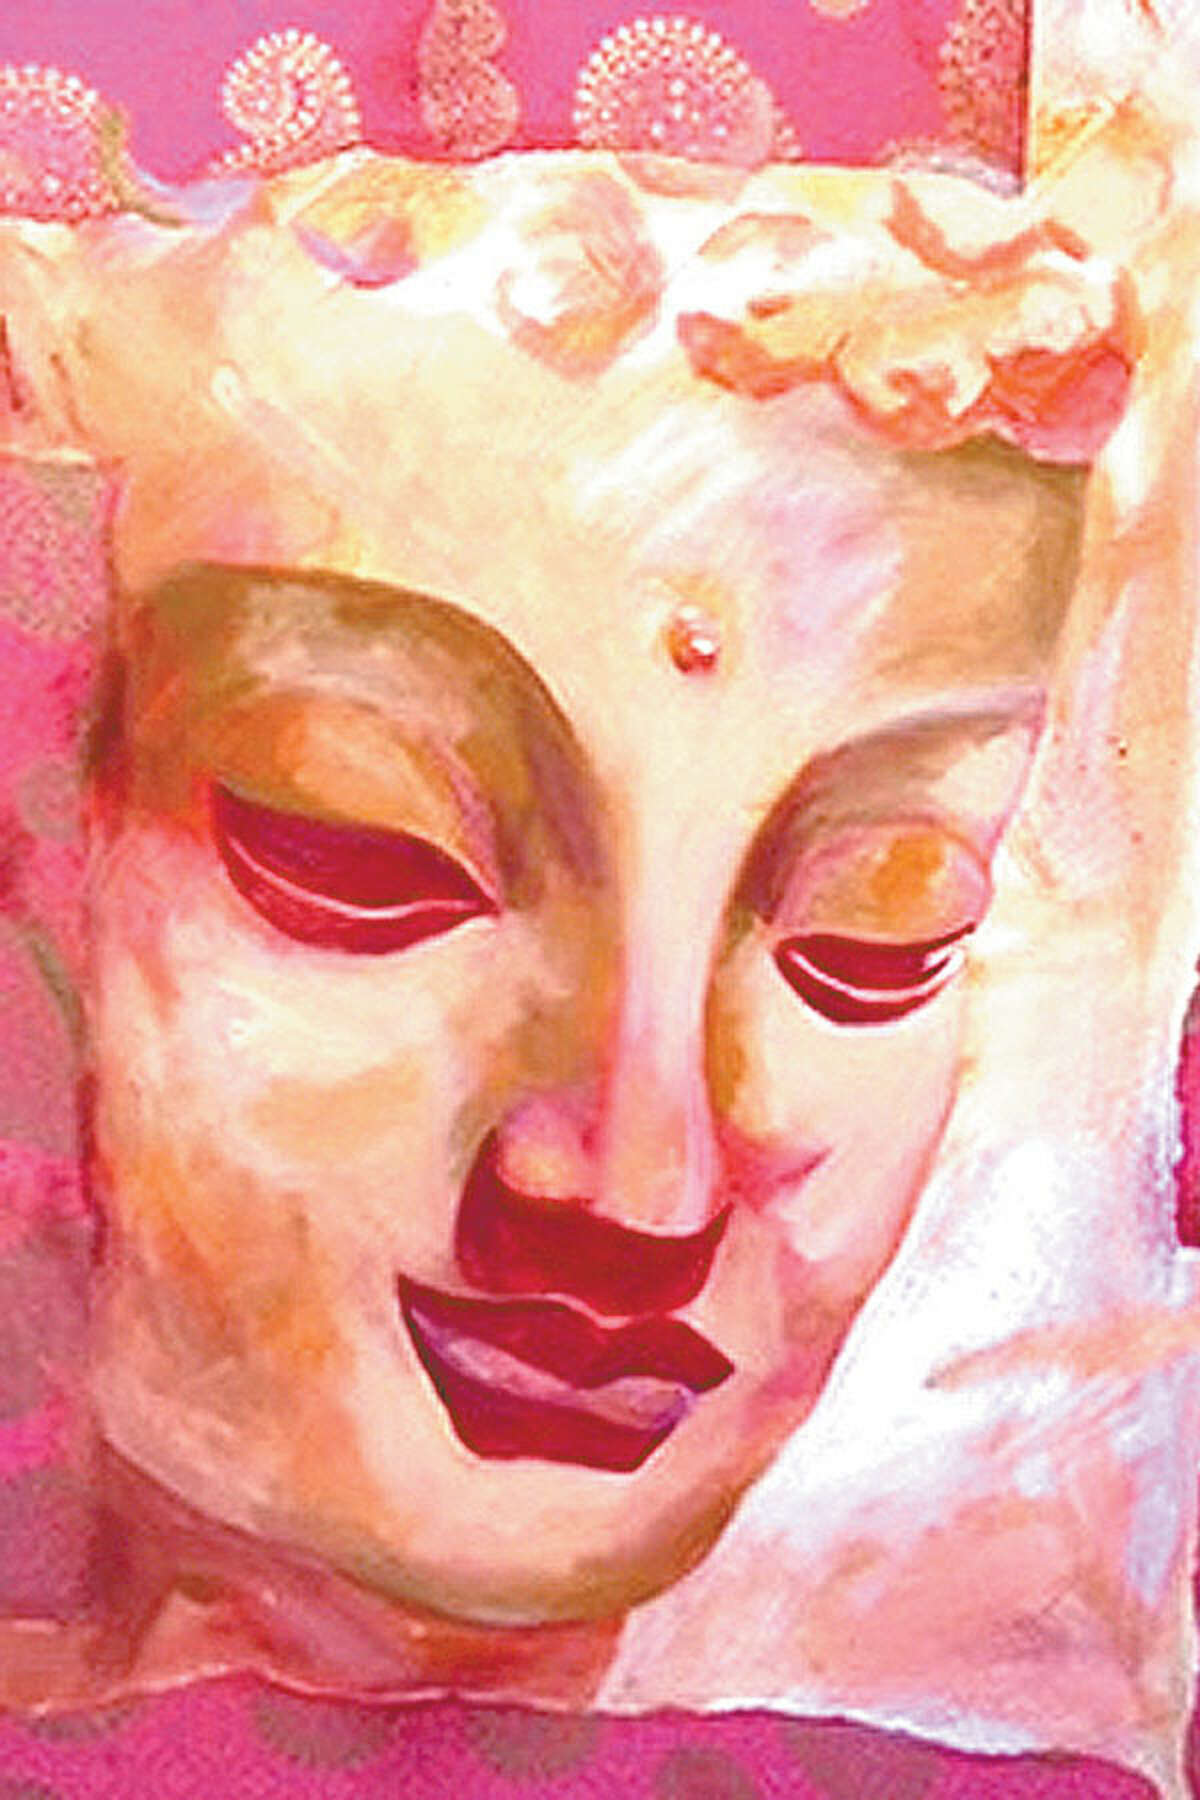 Wilton resident Jill Morton’s Buddha painting will be featured in Wilton Library’s NEST Art Exhibition, opening June 1 at 6 p.m.